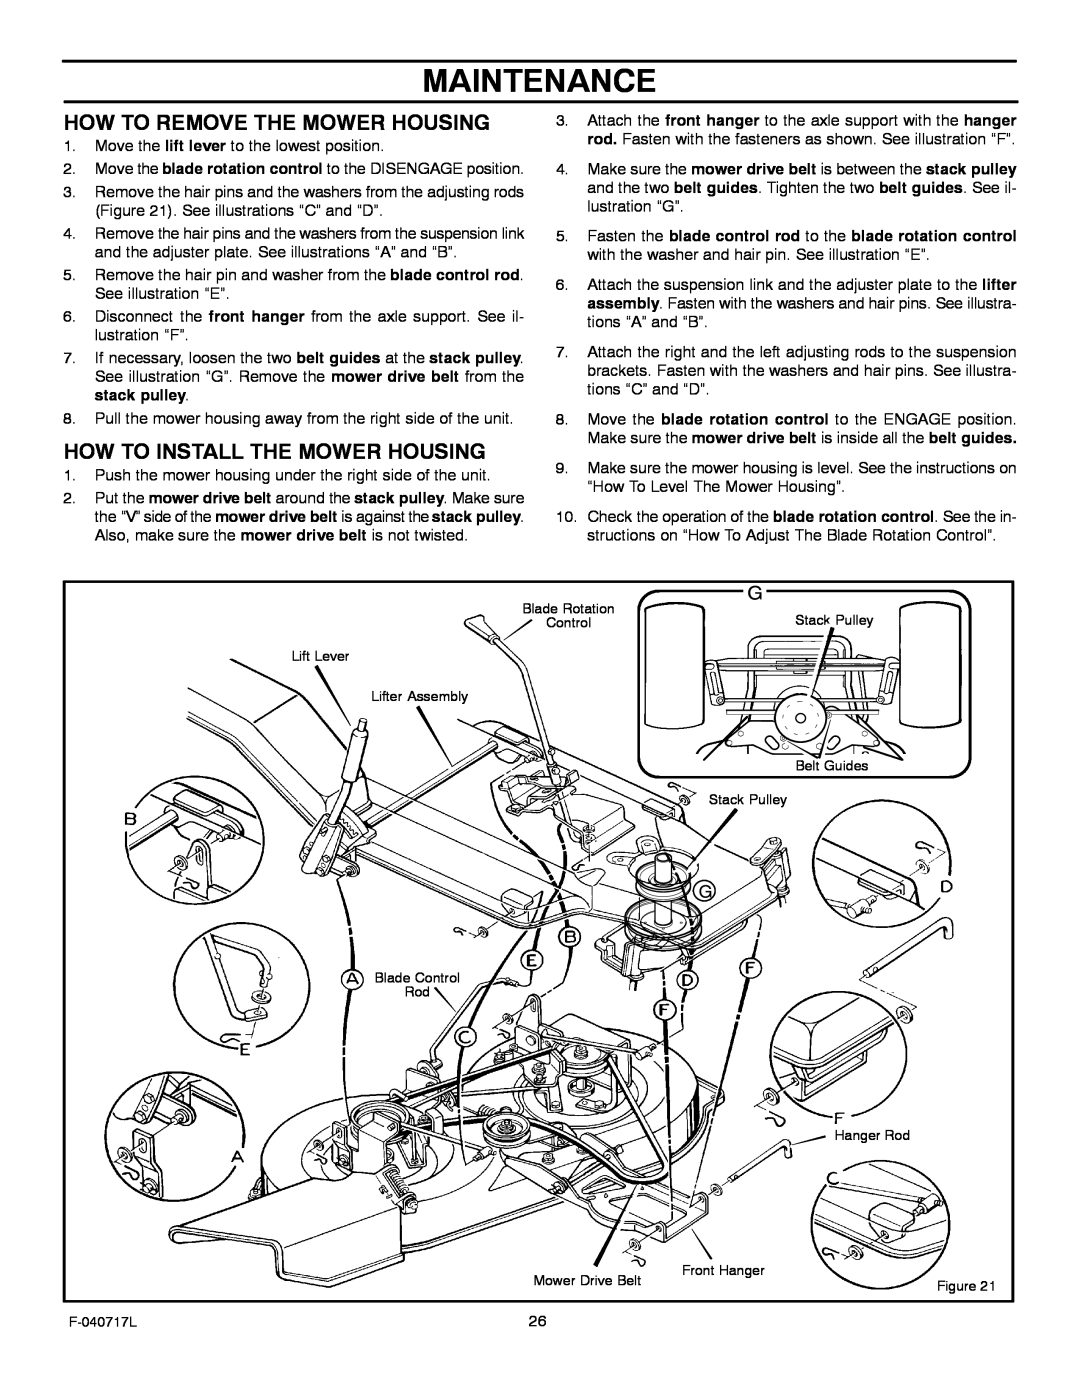 Murray 387002x92A manual Maintenance, How To Remove The Mower Housing, How To Install The Mower Housing 